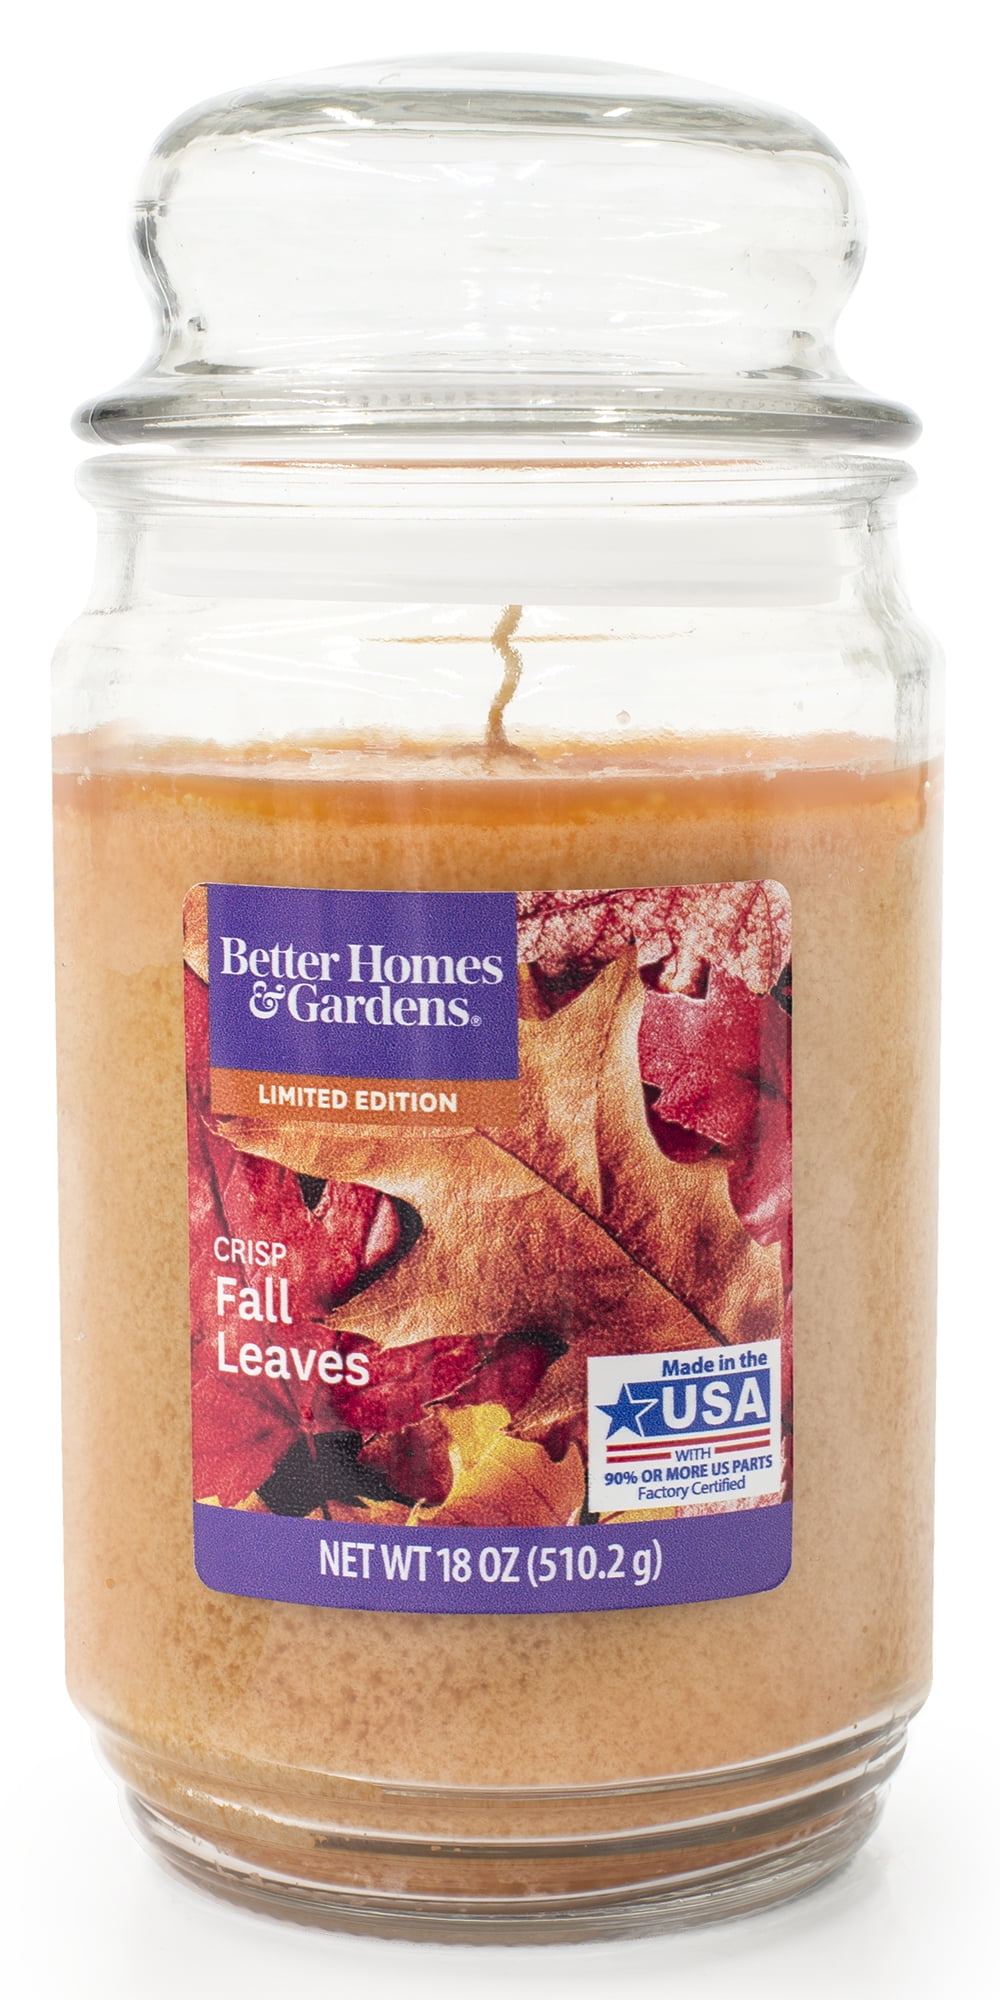 FALLEN LEAVES Scented Candle